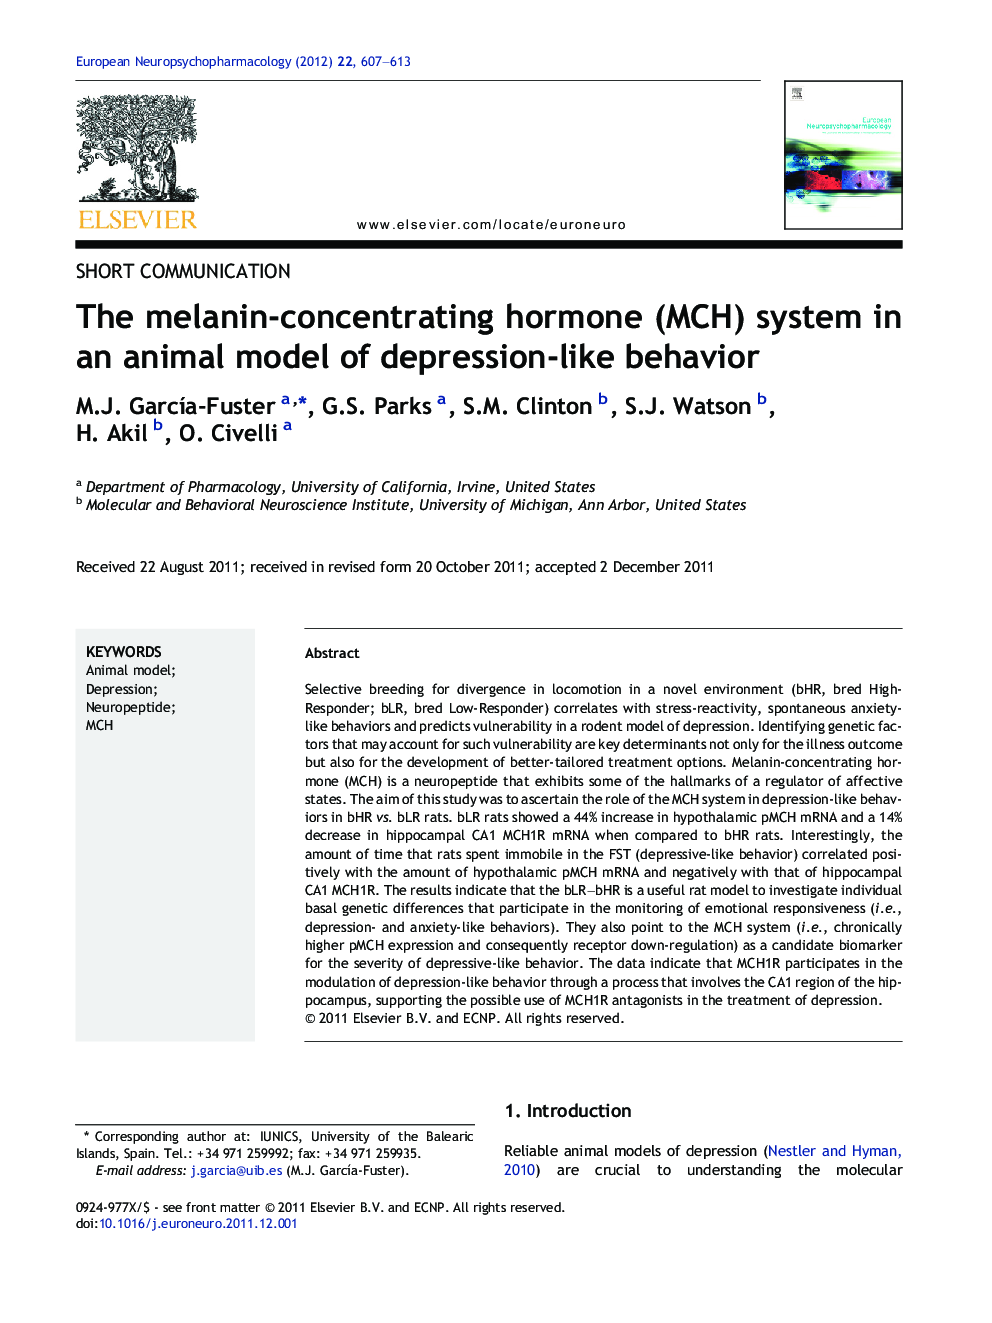 The melanin-concentrating hormone (MCH) system in an animal model of depression-like behavior